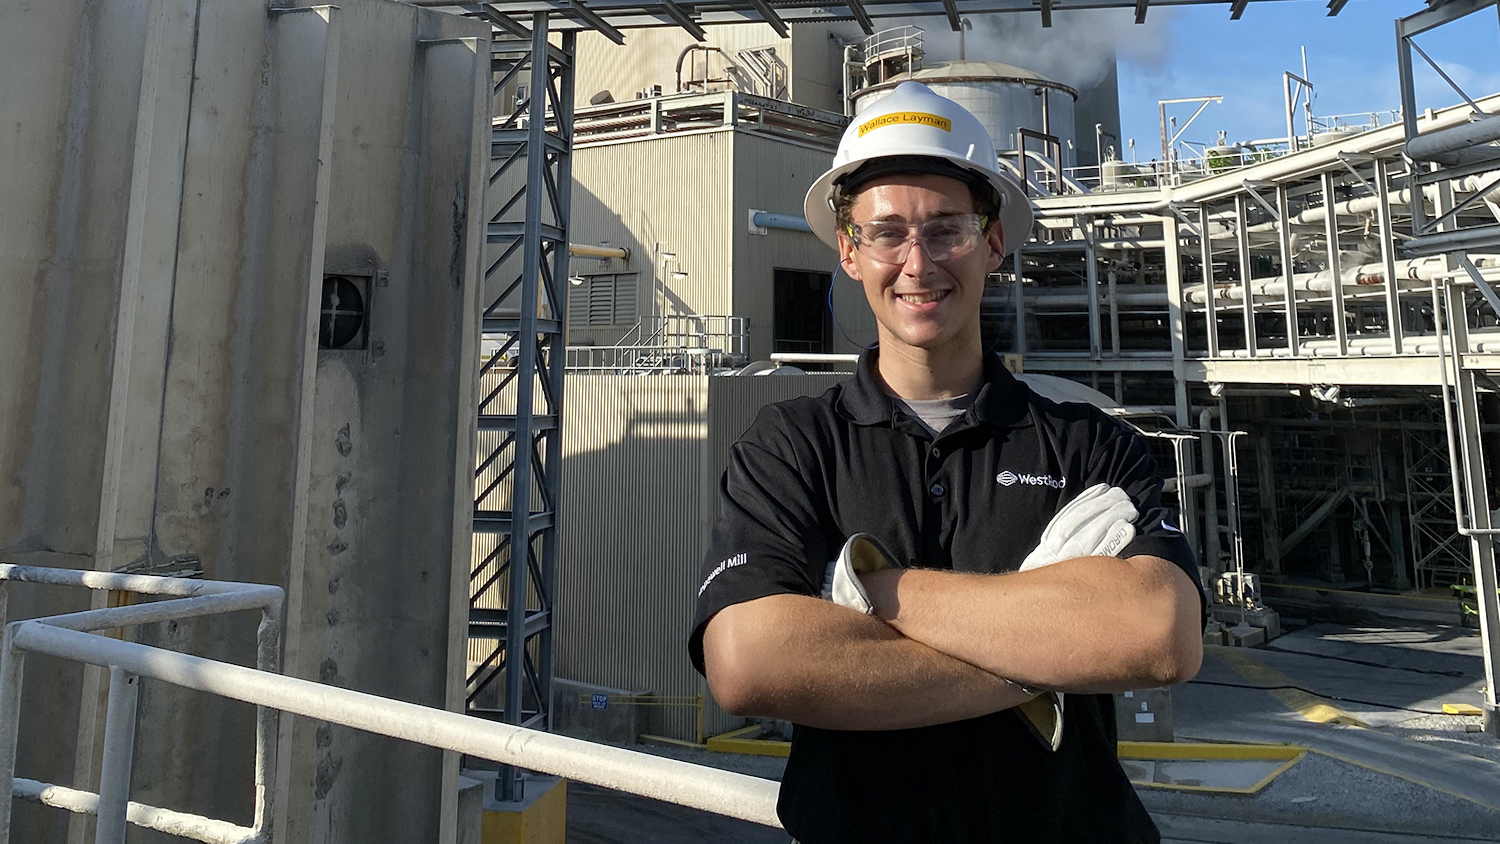 NC State student Wallace Layman posing for a photo at the WestRock facility in Virginia.